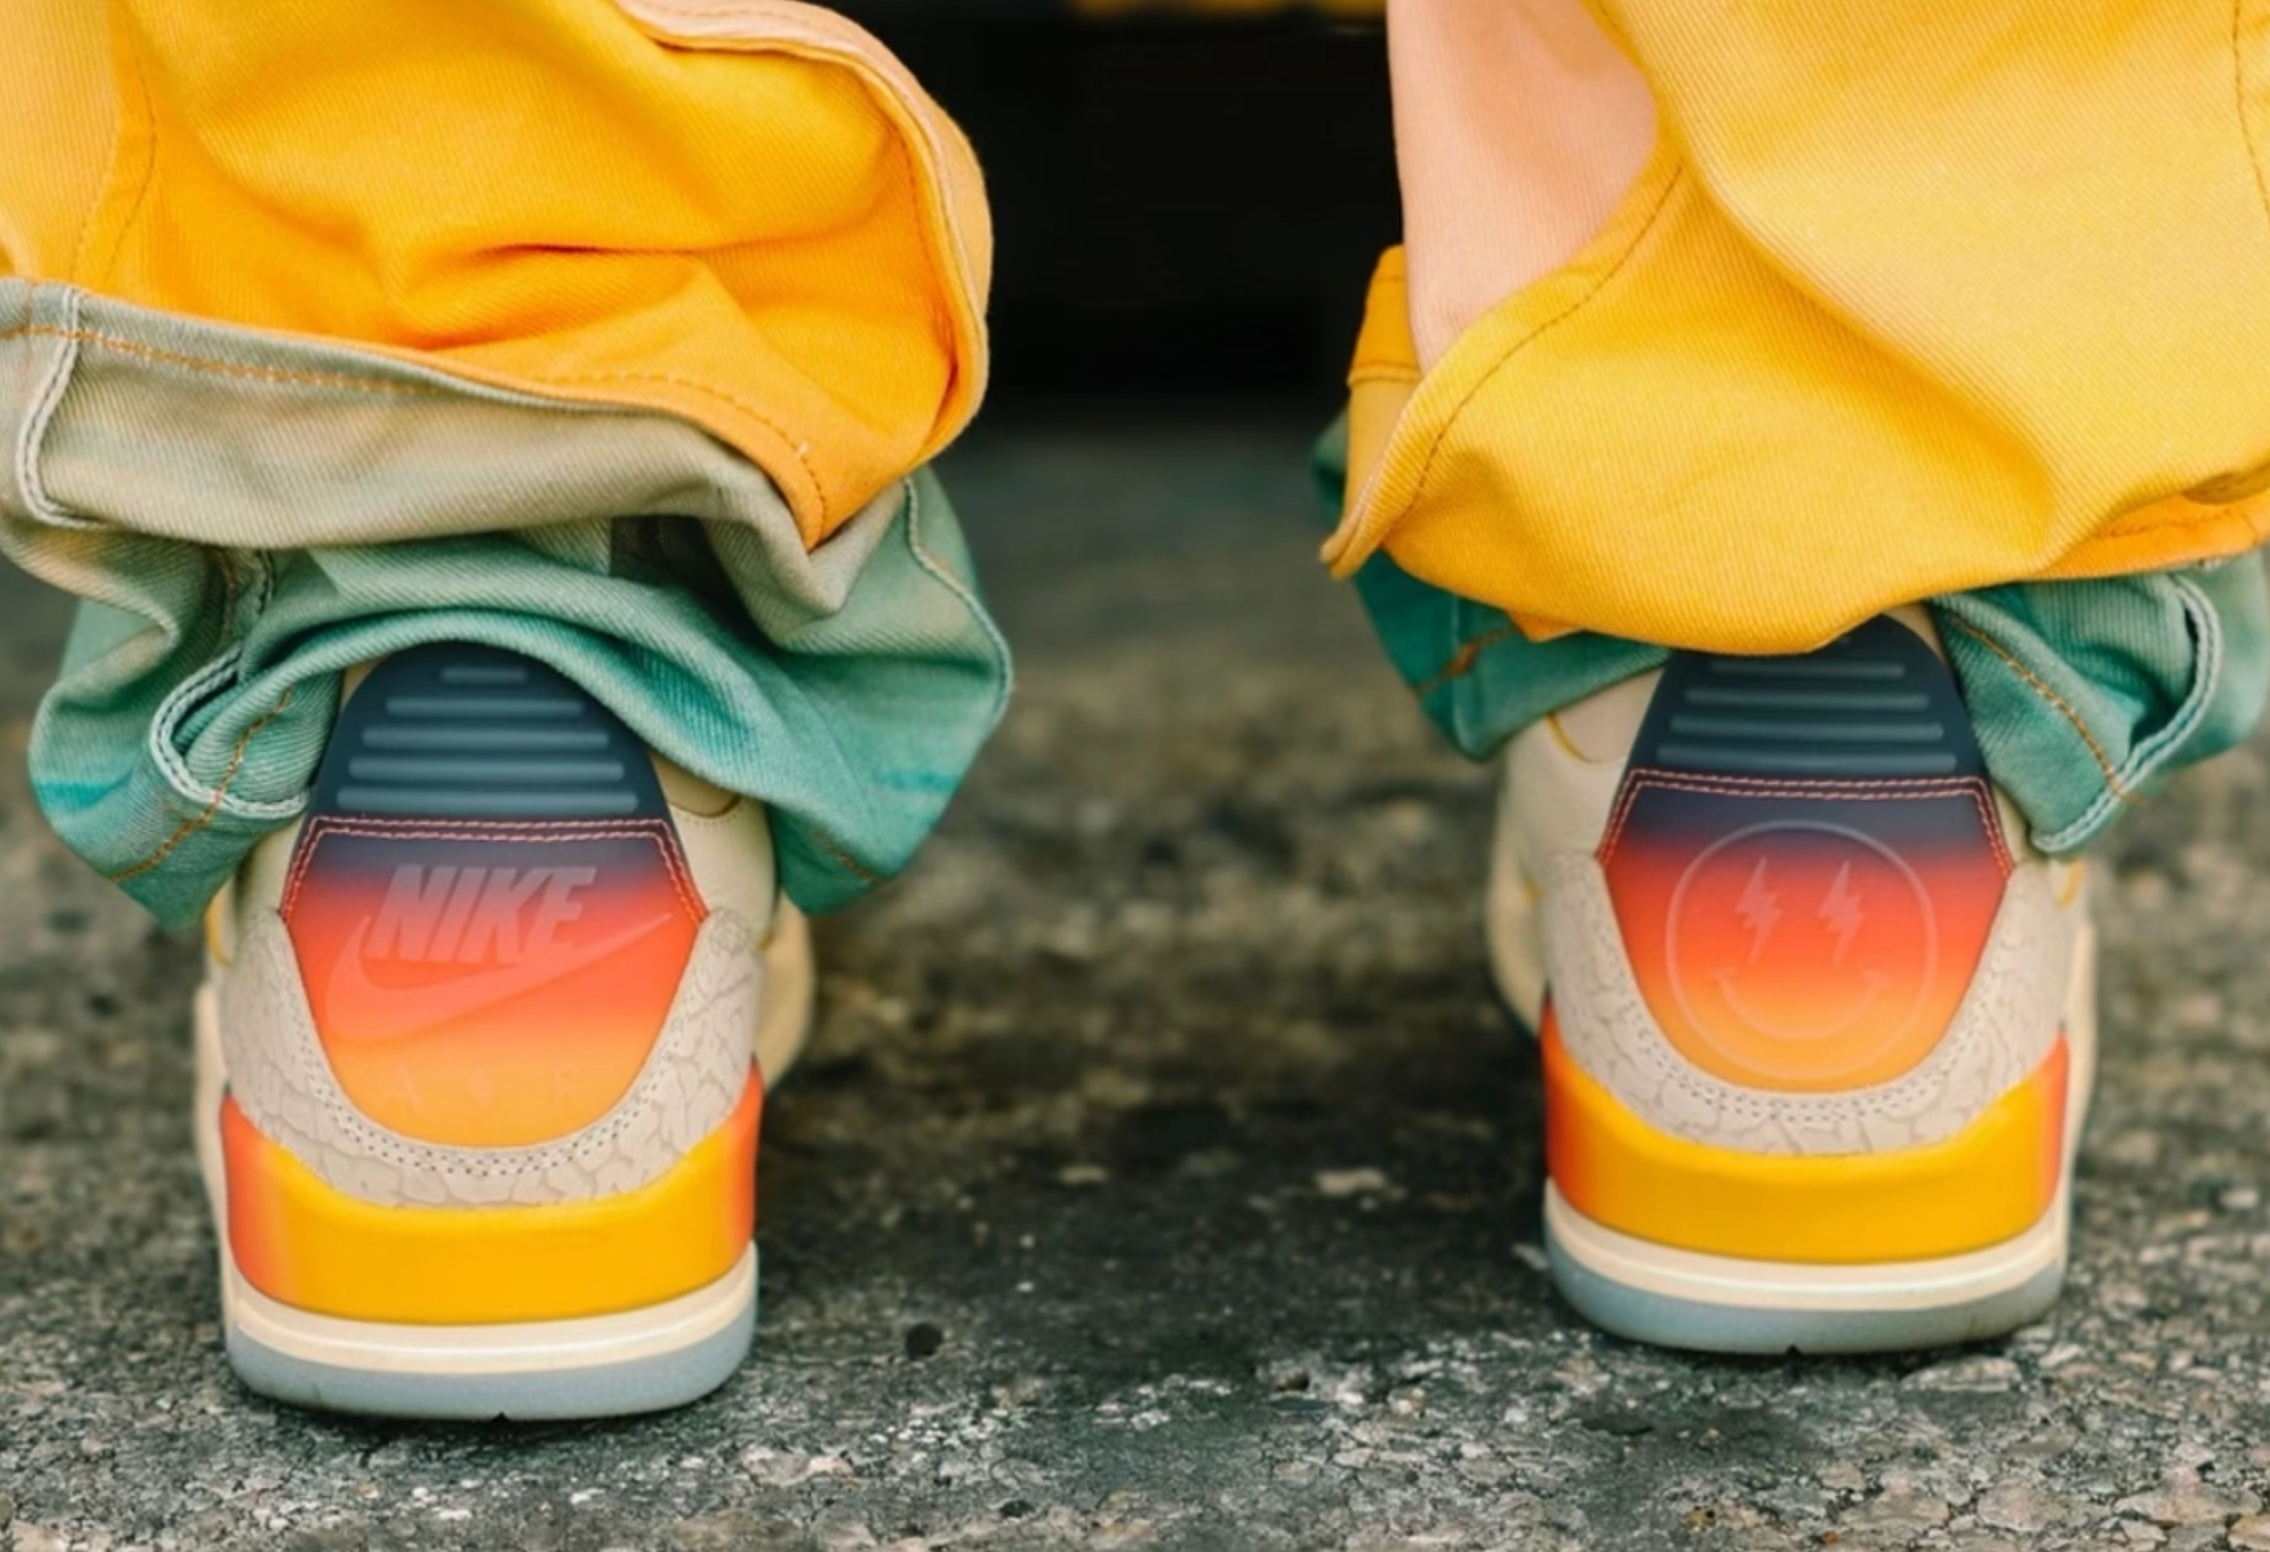 J Balvin on Air Jordan 3 Collaboration and Medellin Colombia Themes